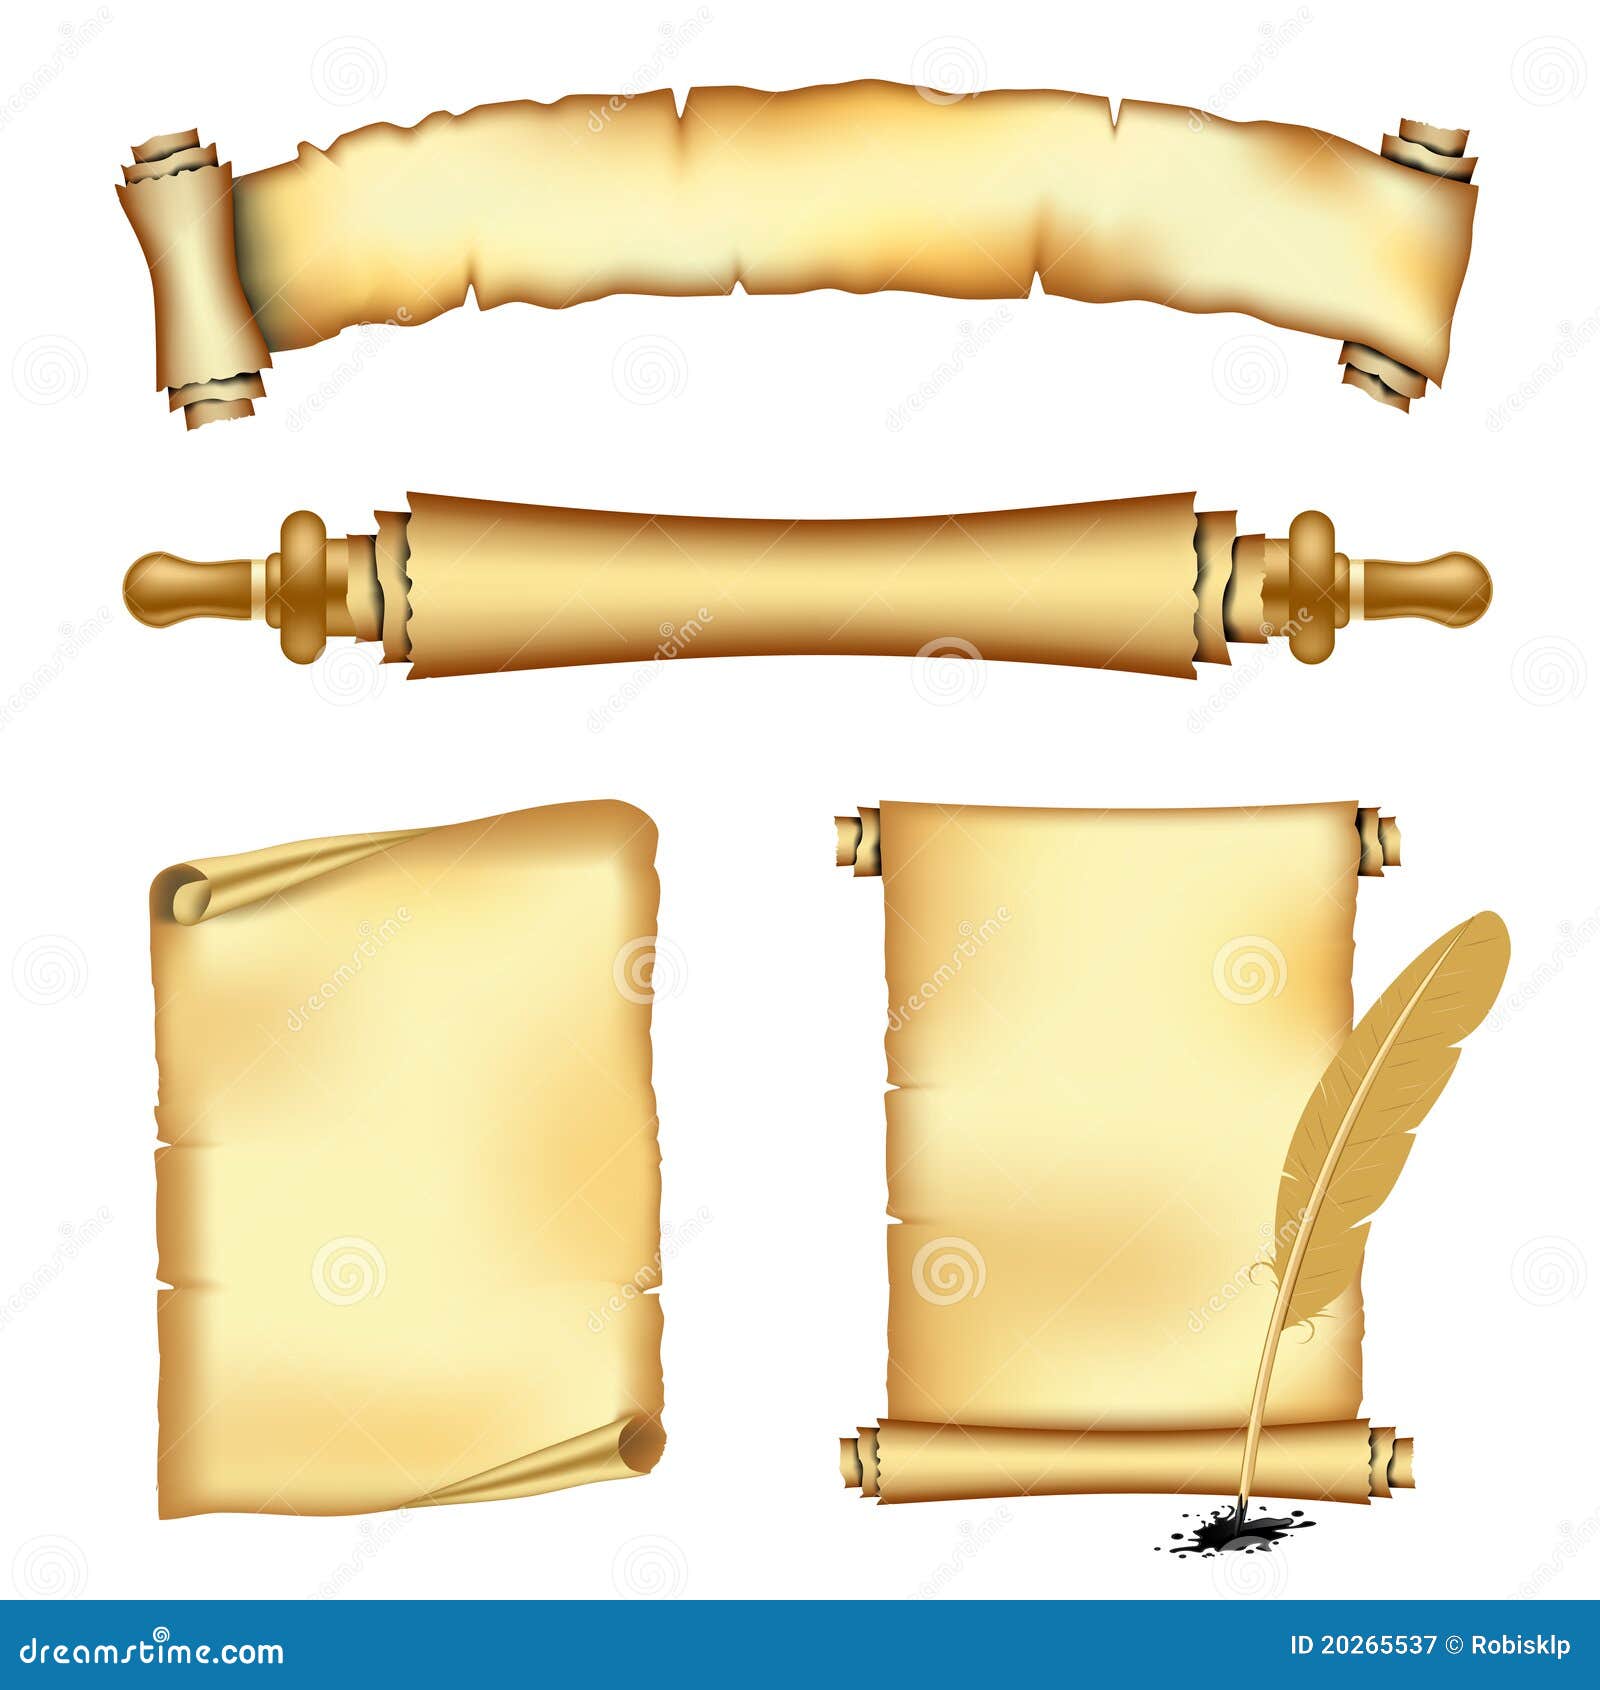 clipart scrolls and banners - photo #35